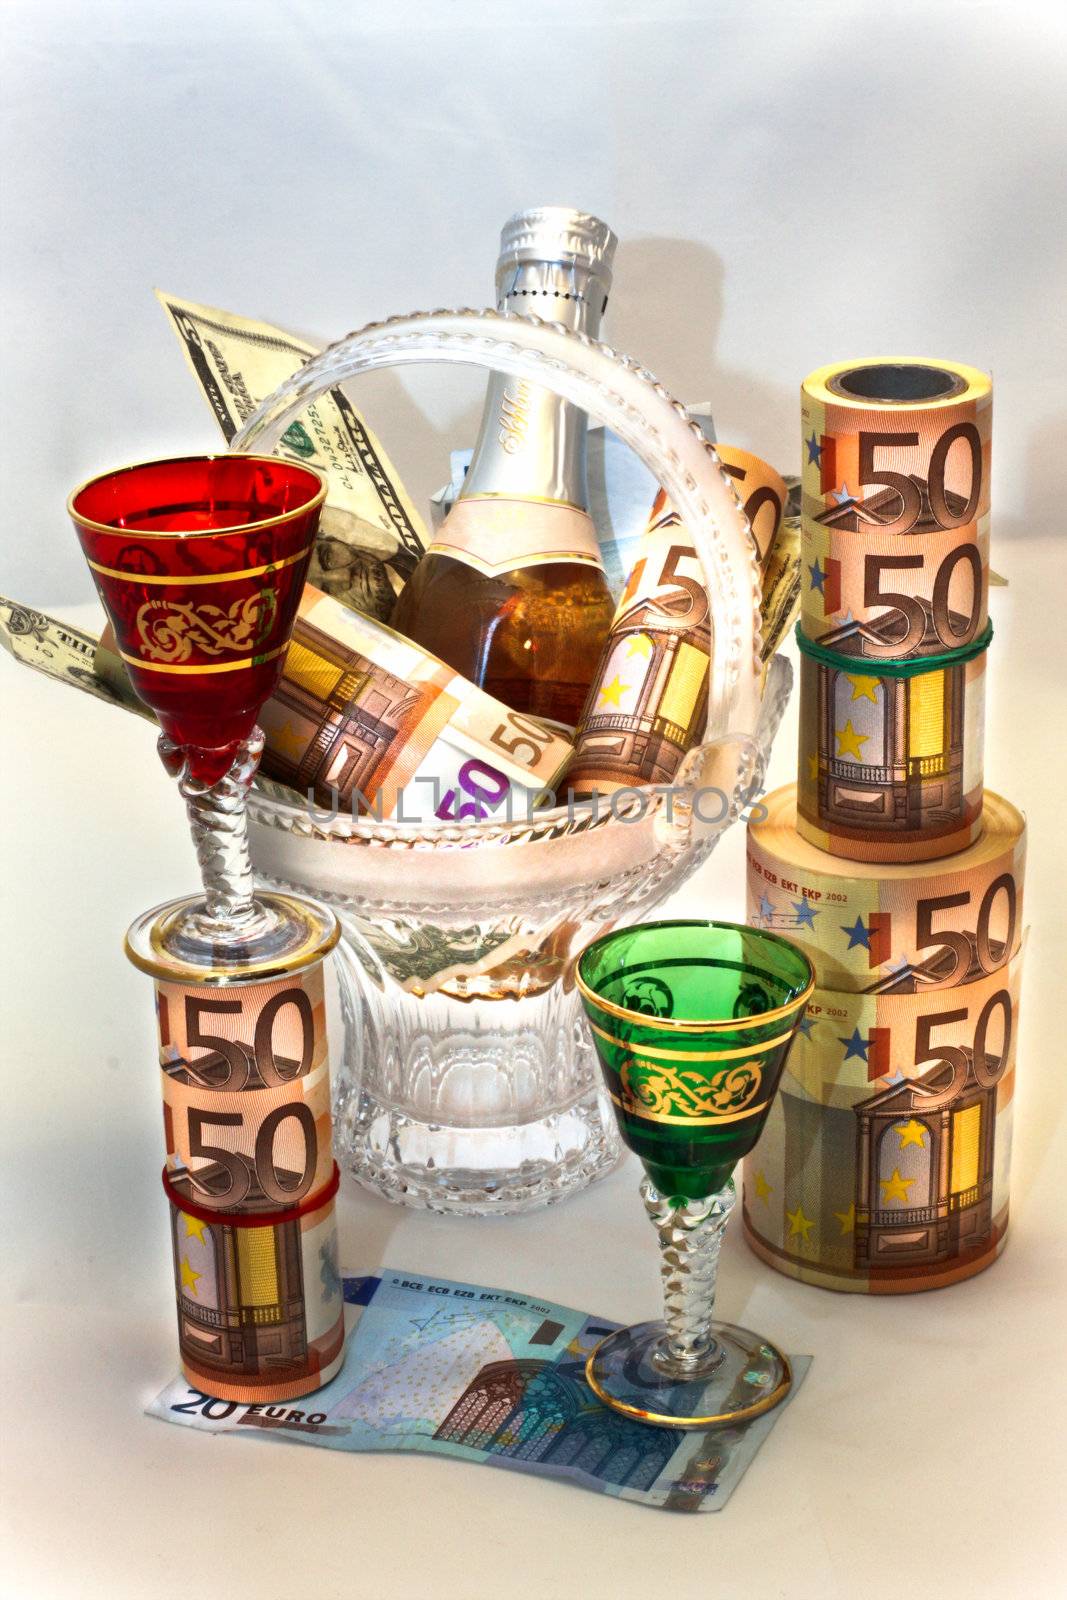 Money, wine, beautiful wine-glasses and vase by client111